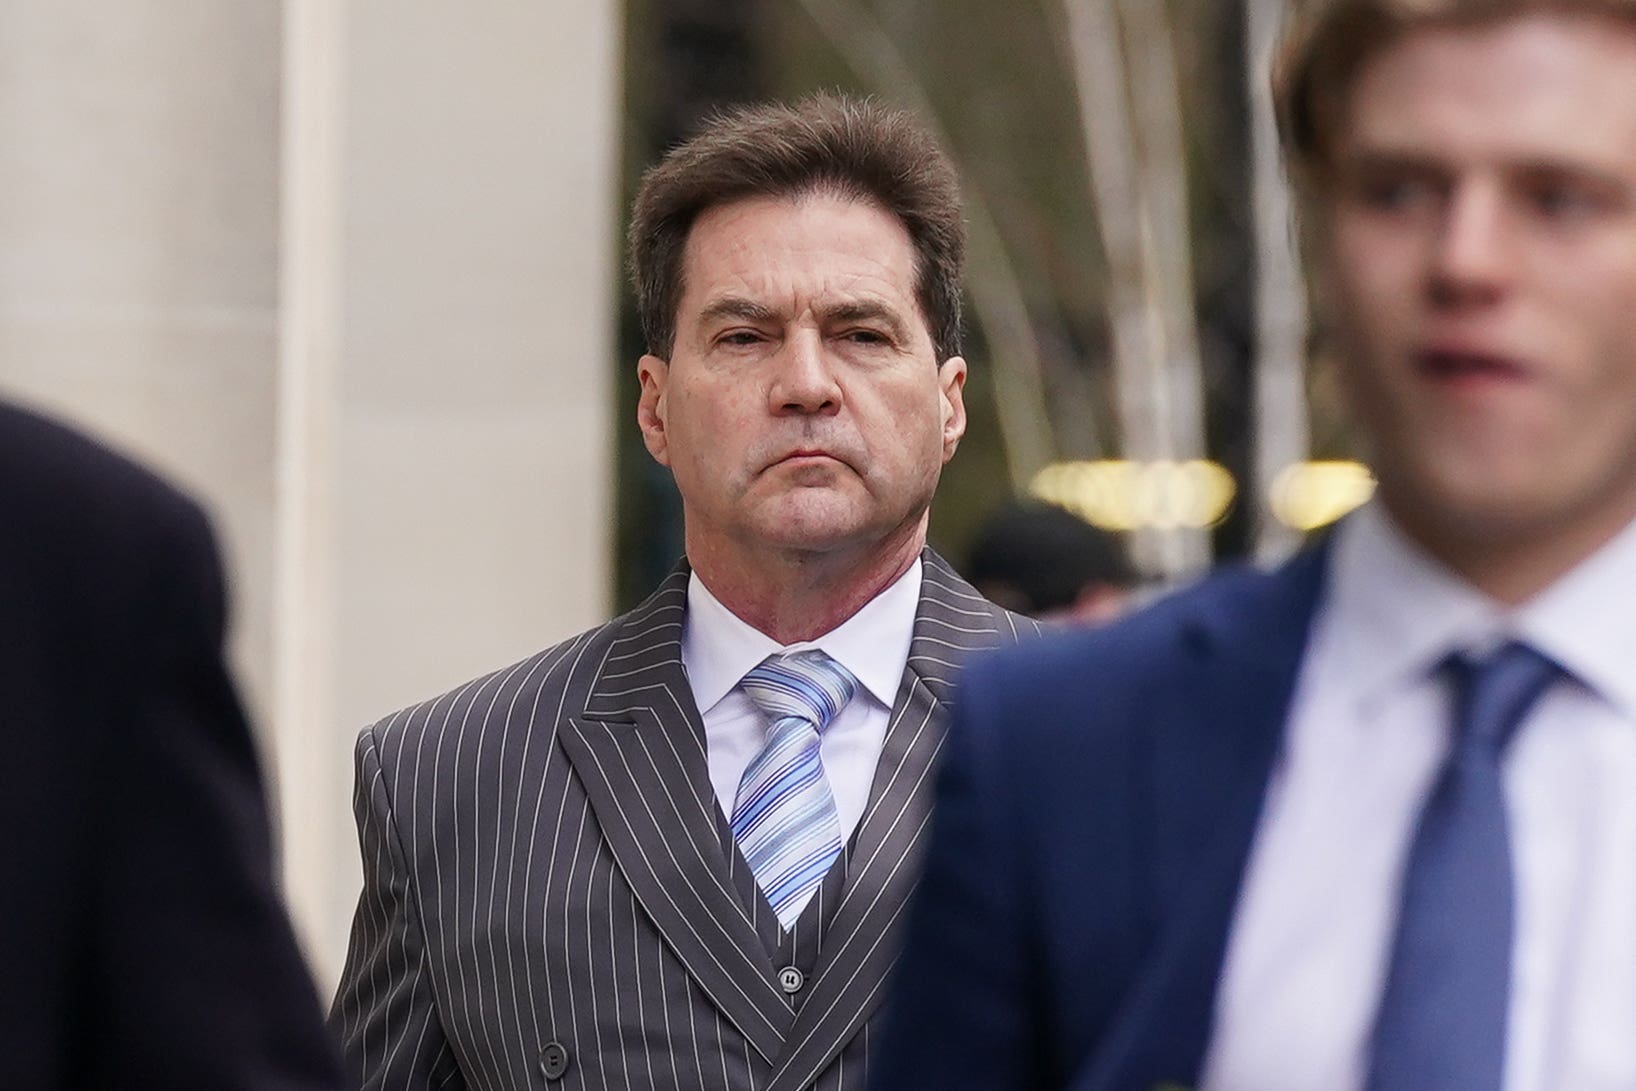 Dr Craig Wright arriving at the Rolls Building in London (Lucy North/PA)